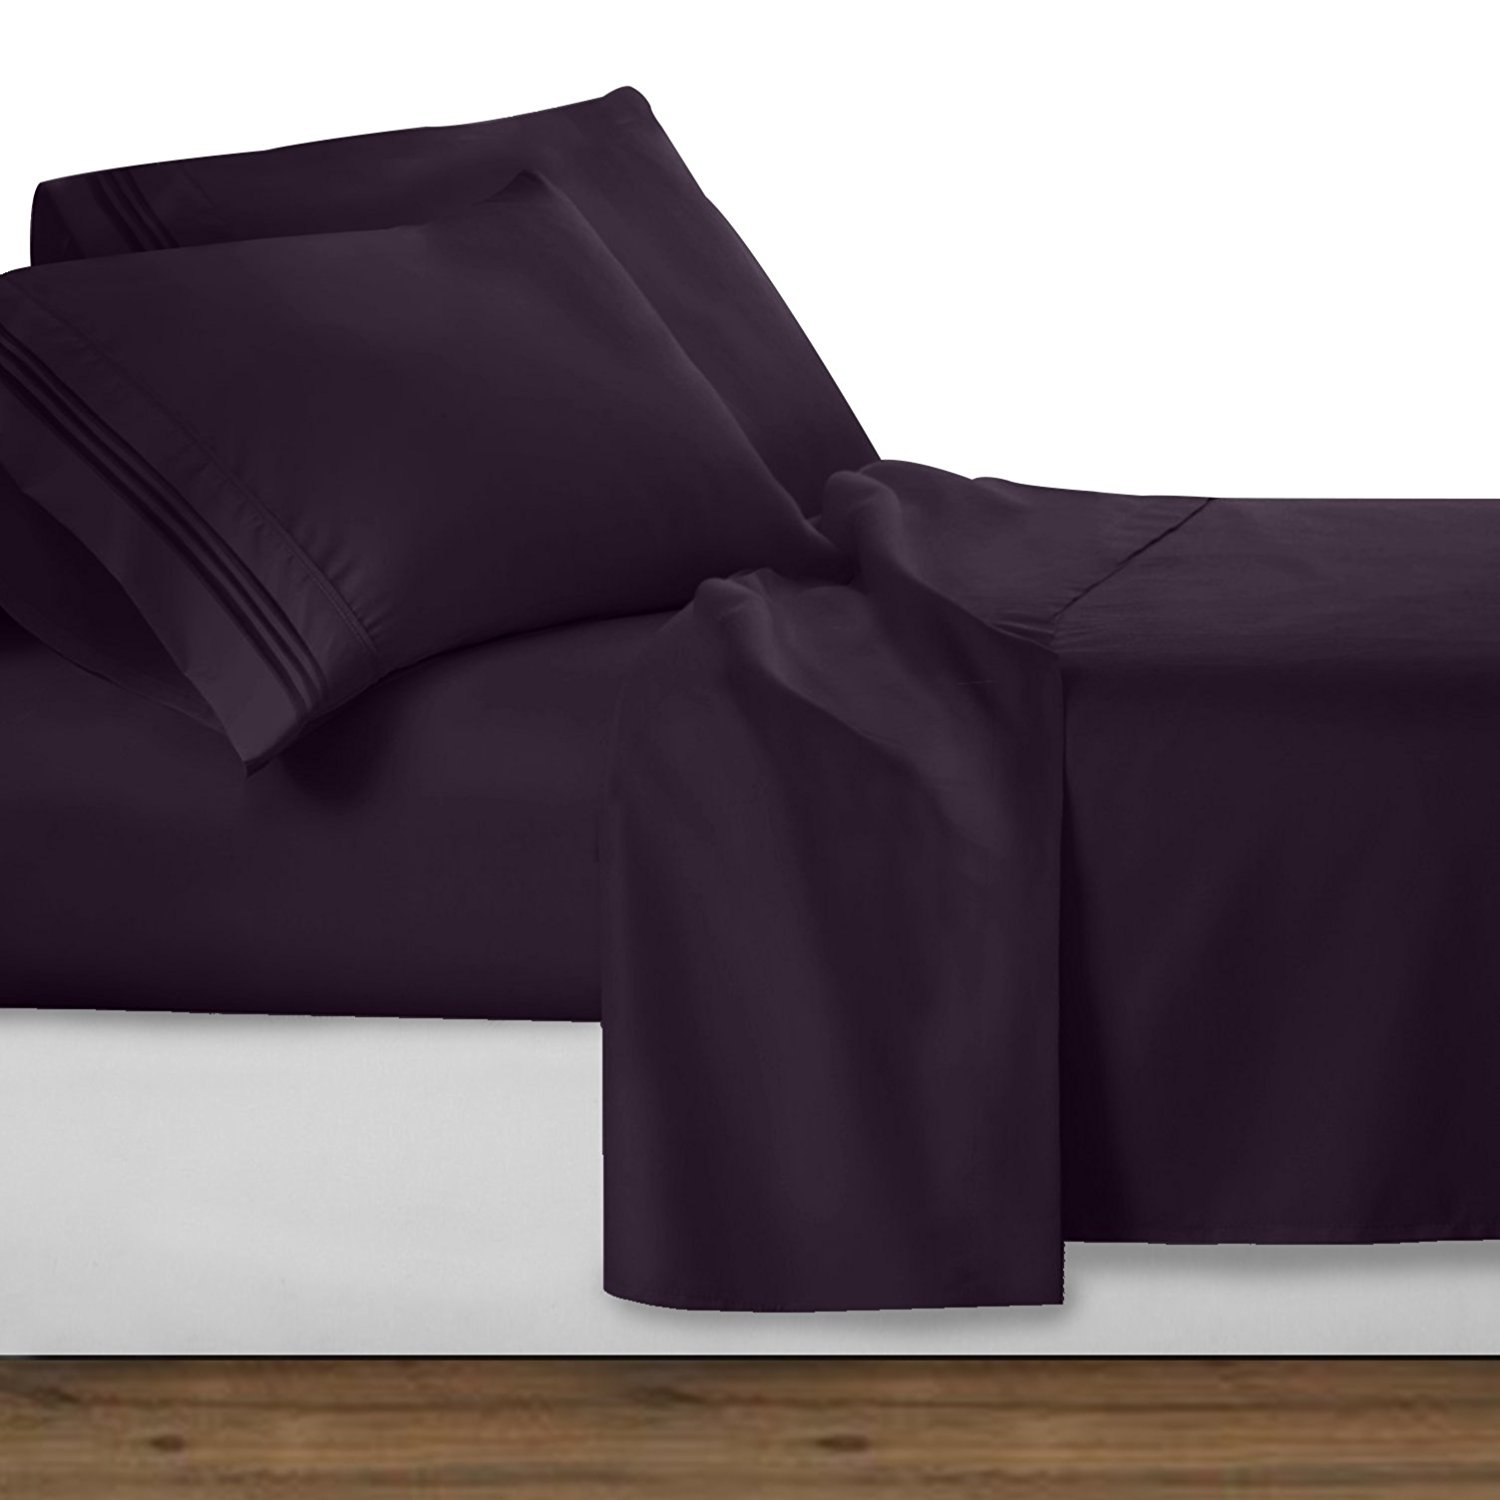 Clara Clark Premier 1800 Collection 4pc Bed Sheet Set - Queen Size, Purple Eggplant, only $15.64